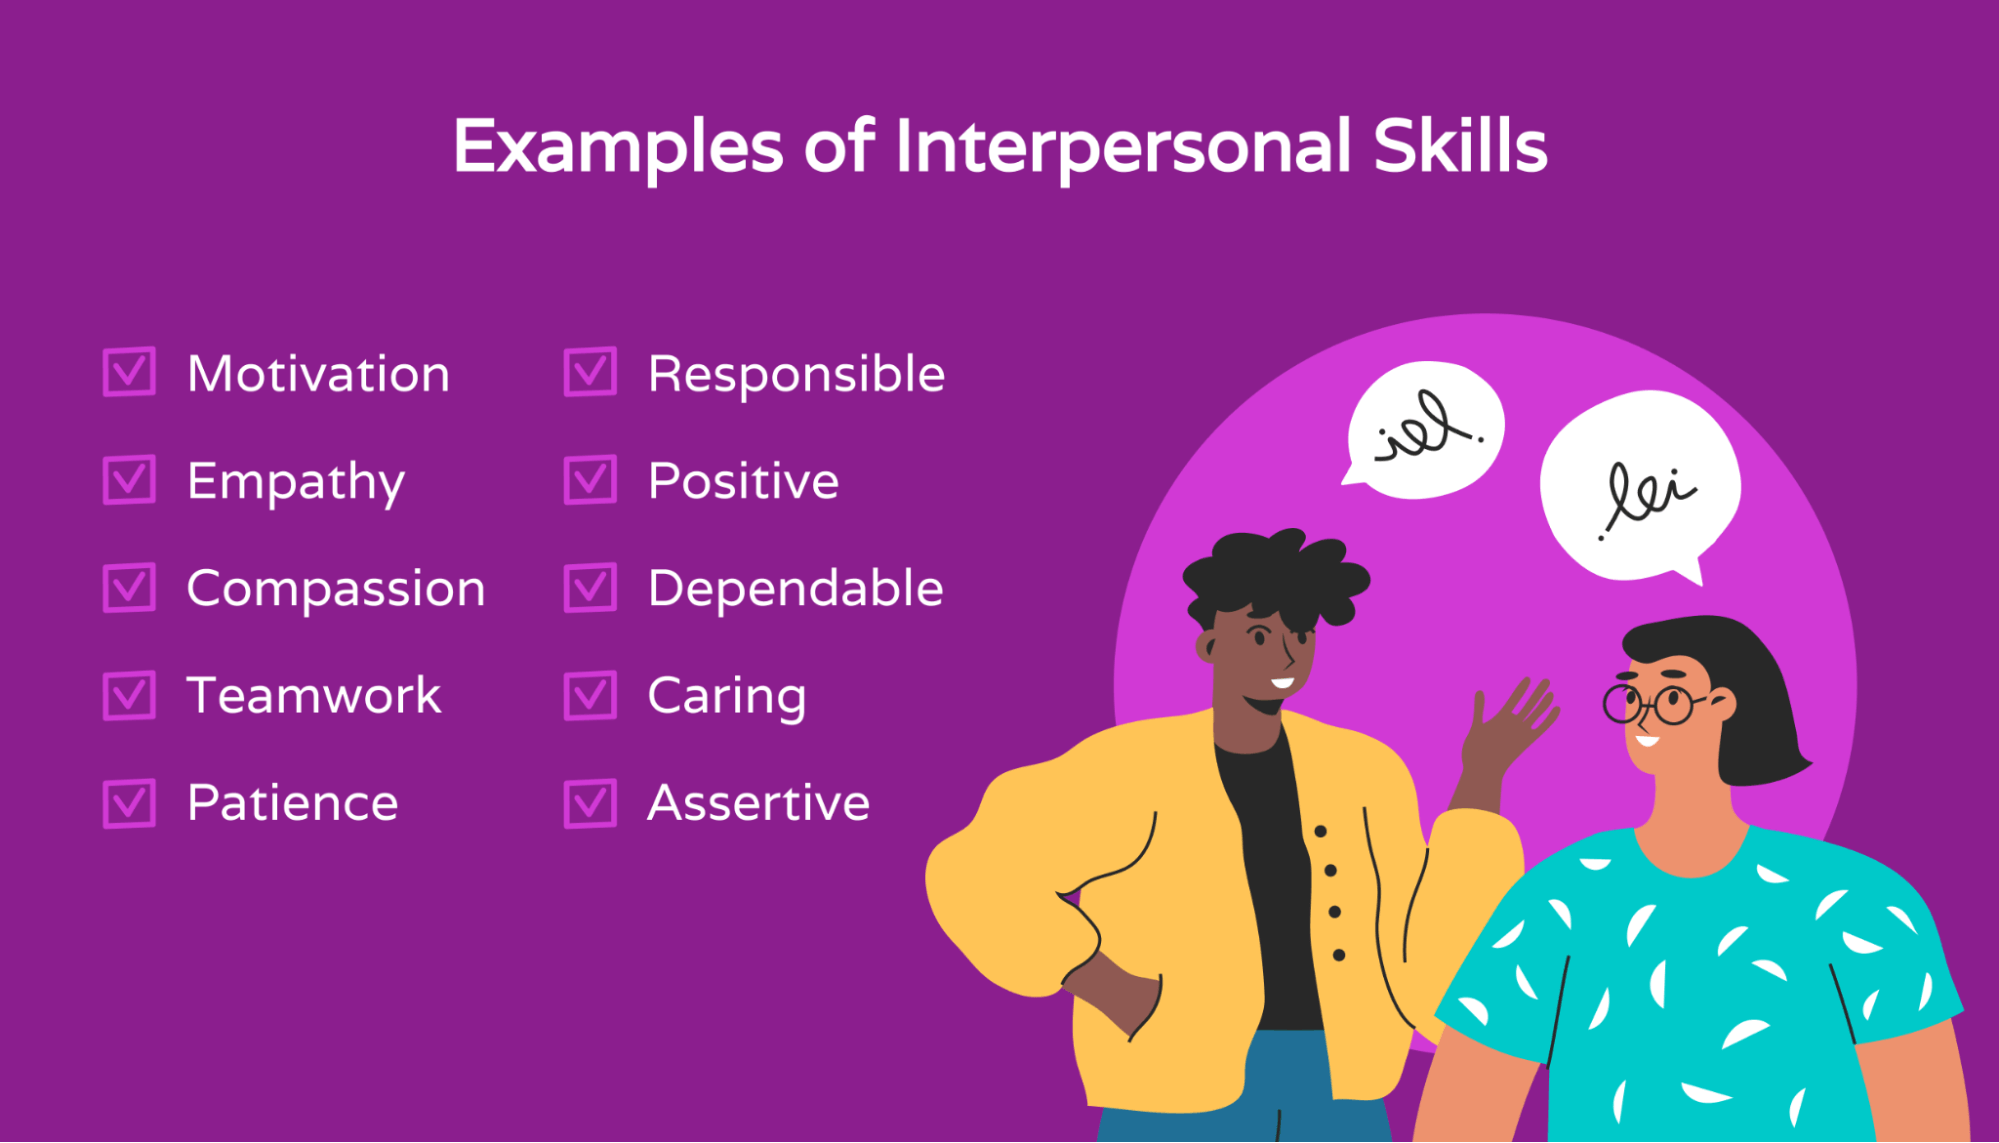 List of examples of interpersonal skills